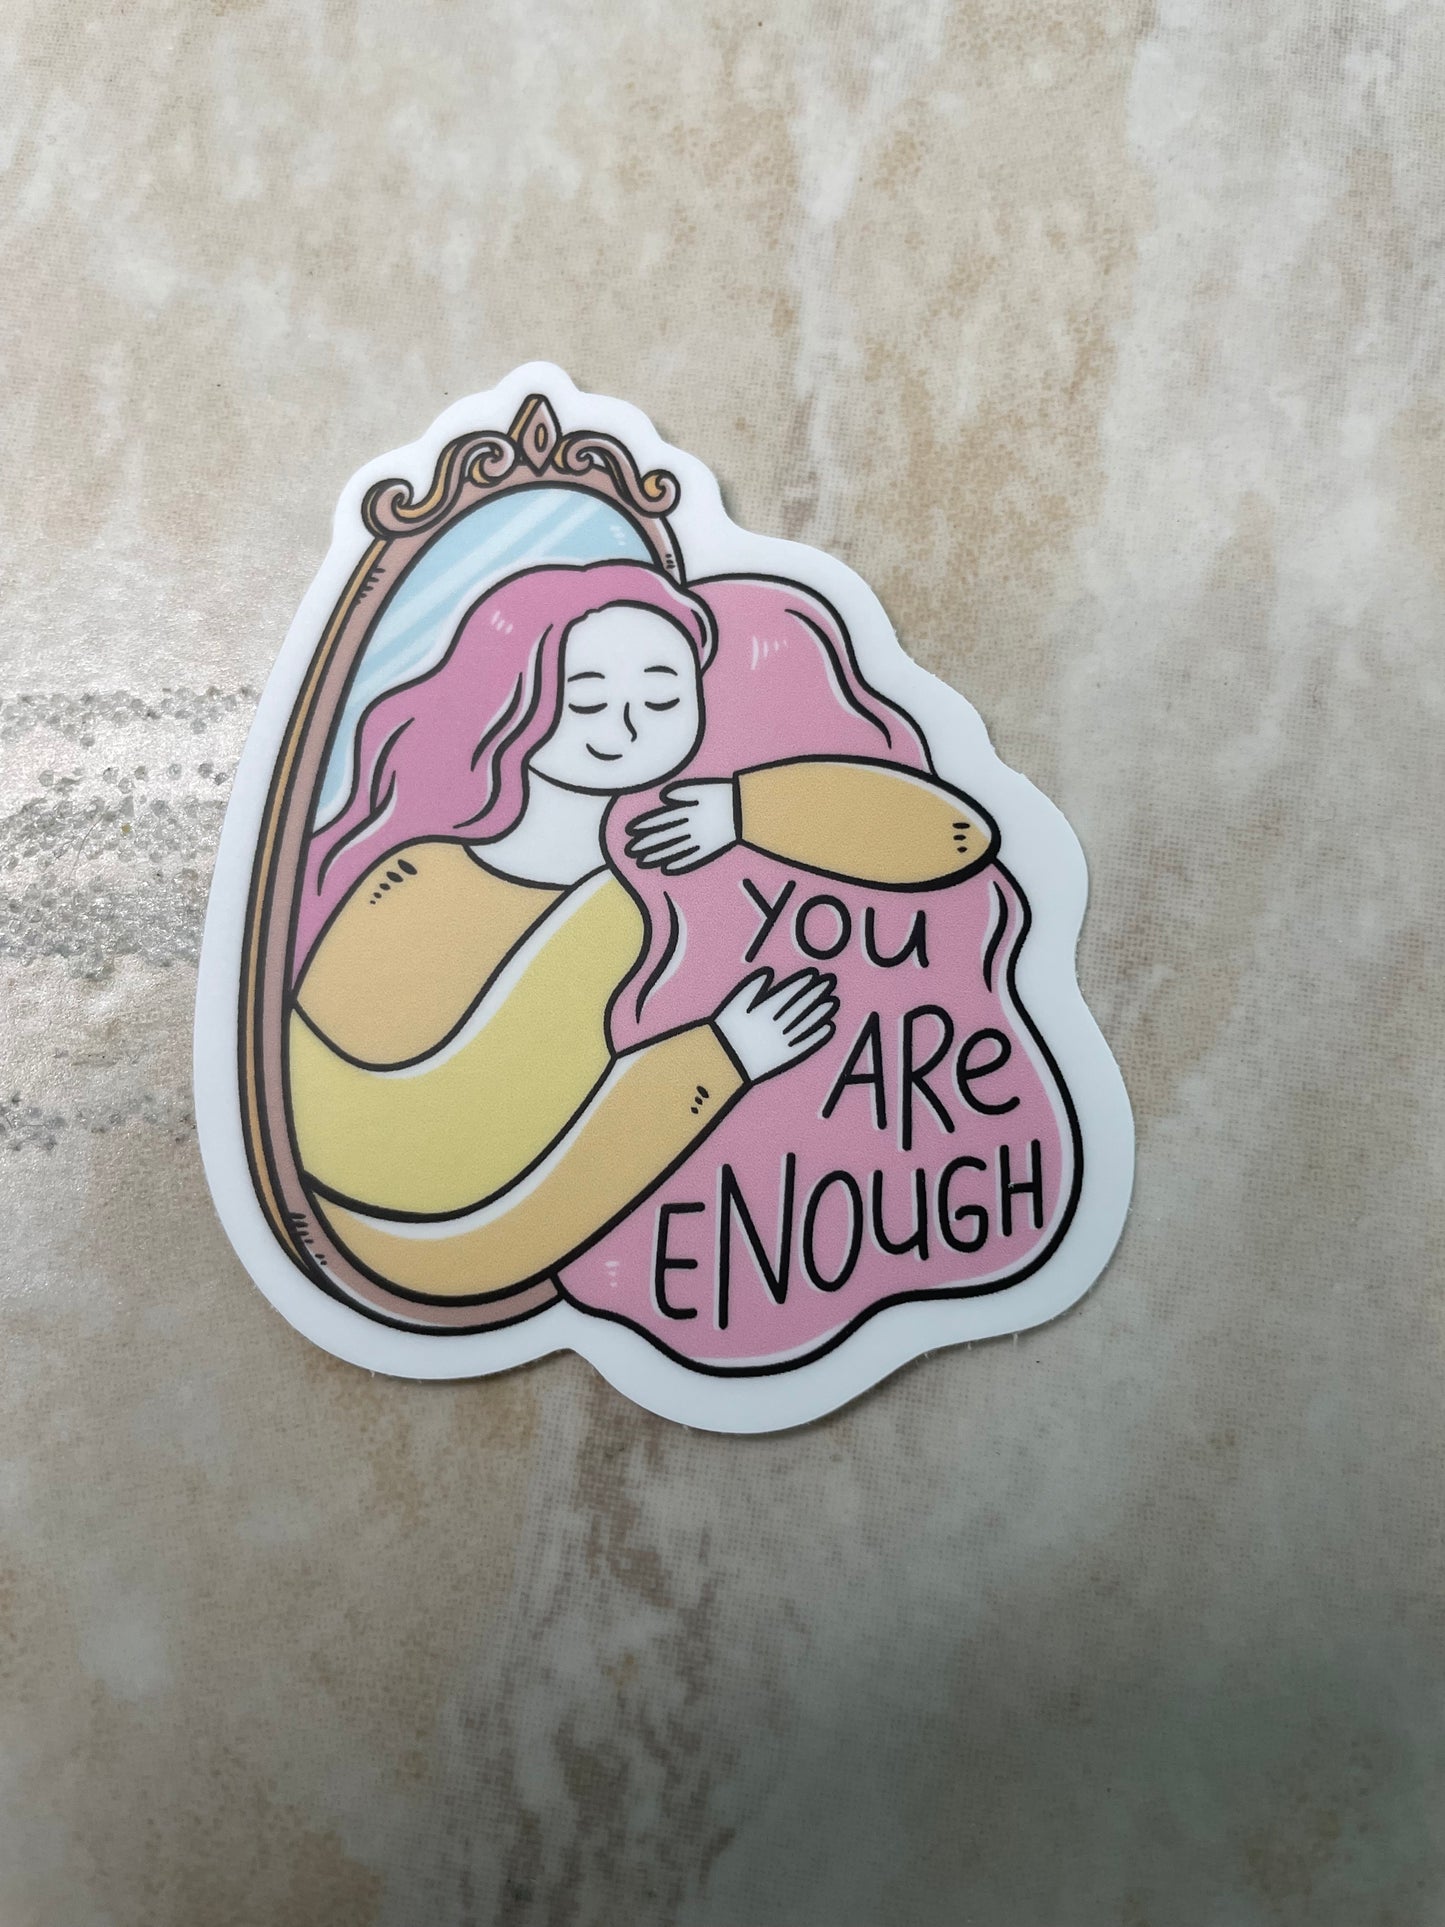 You Are Enough Message in The MirrorBody Positivity Sticker